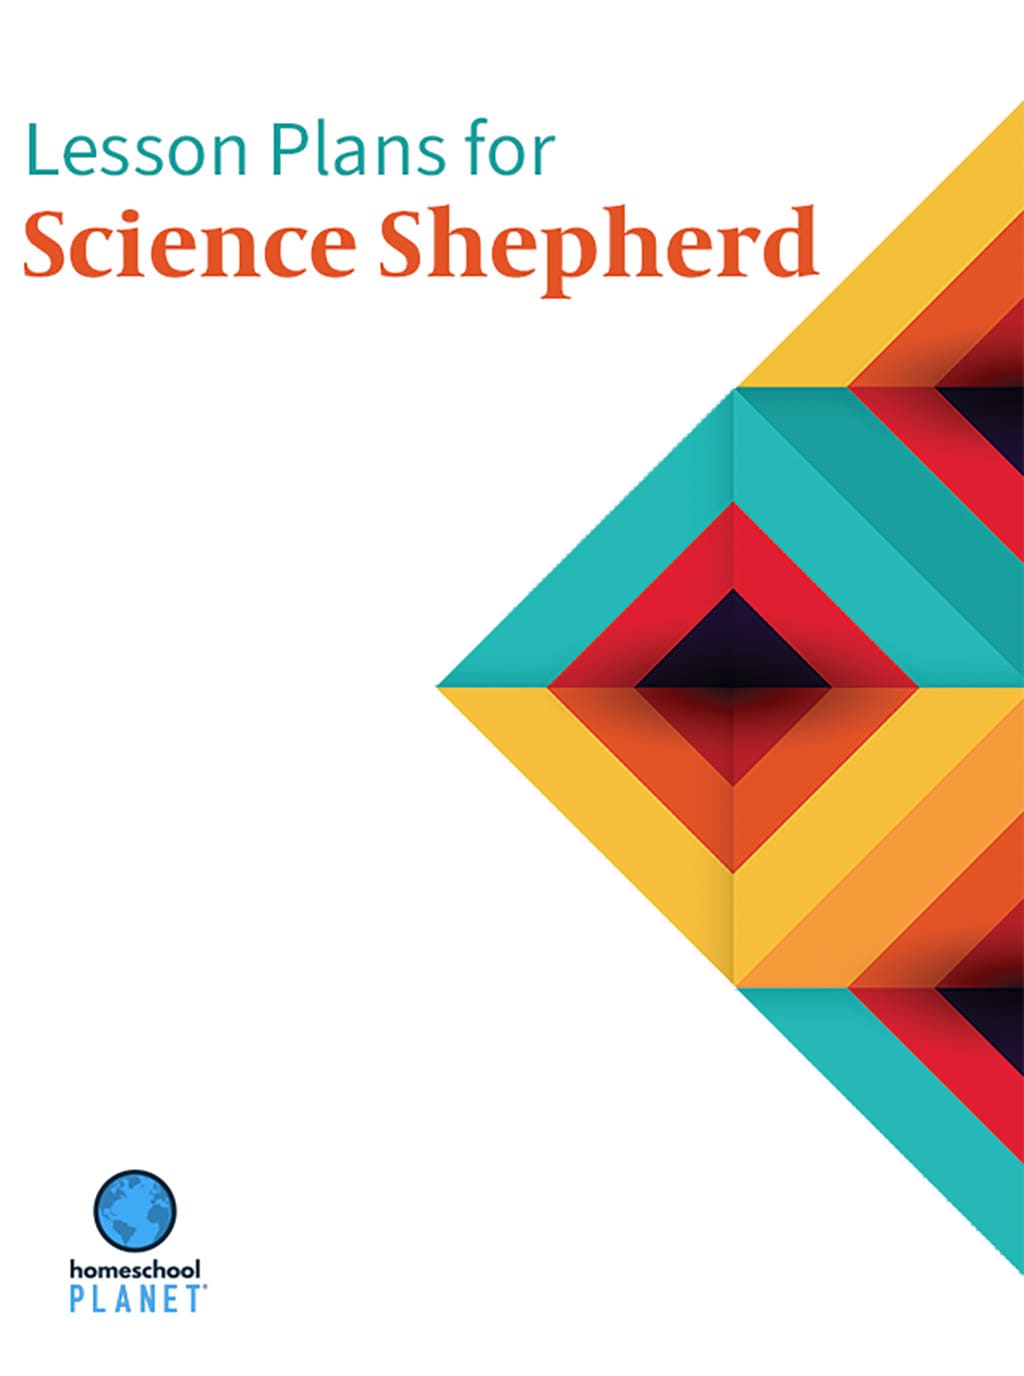 Science Shepherd Life Science homeschool schedule cover image with the Homeschool Planet logo